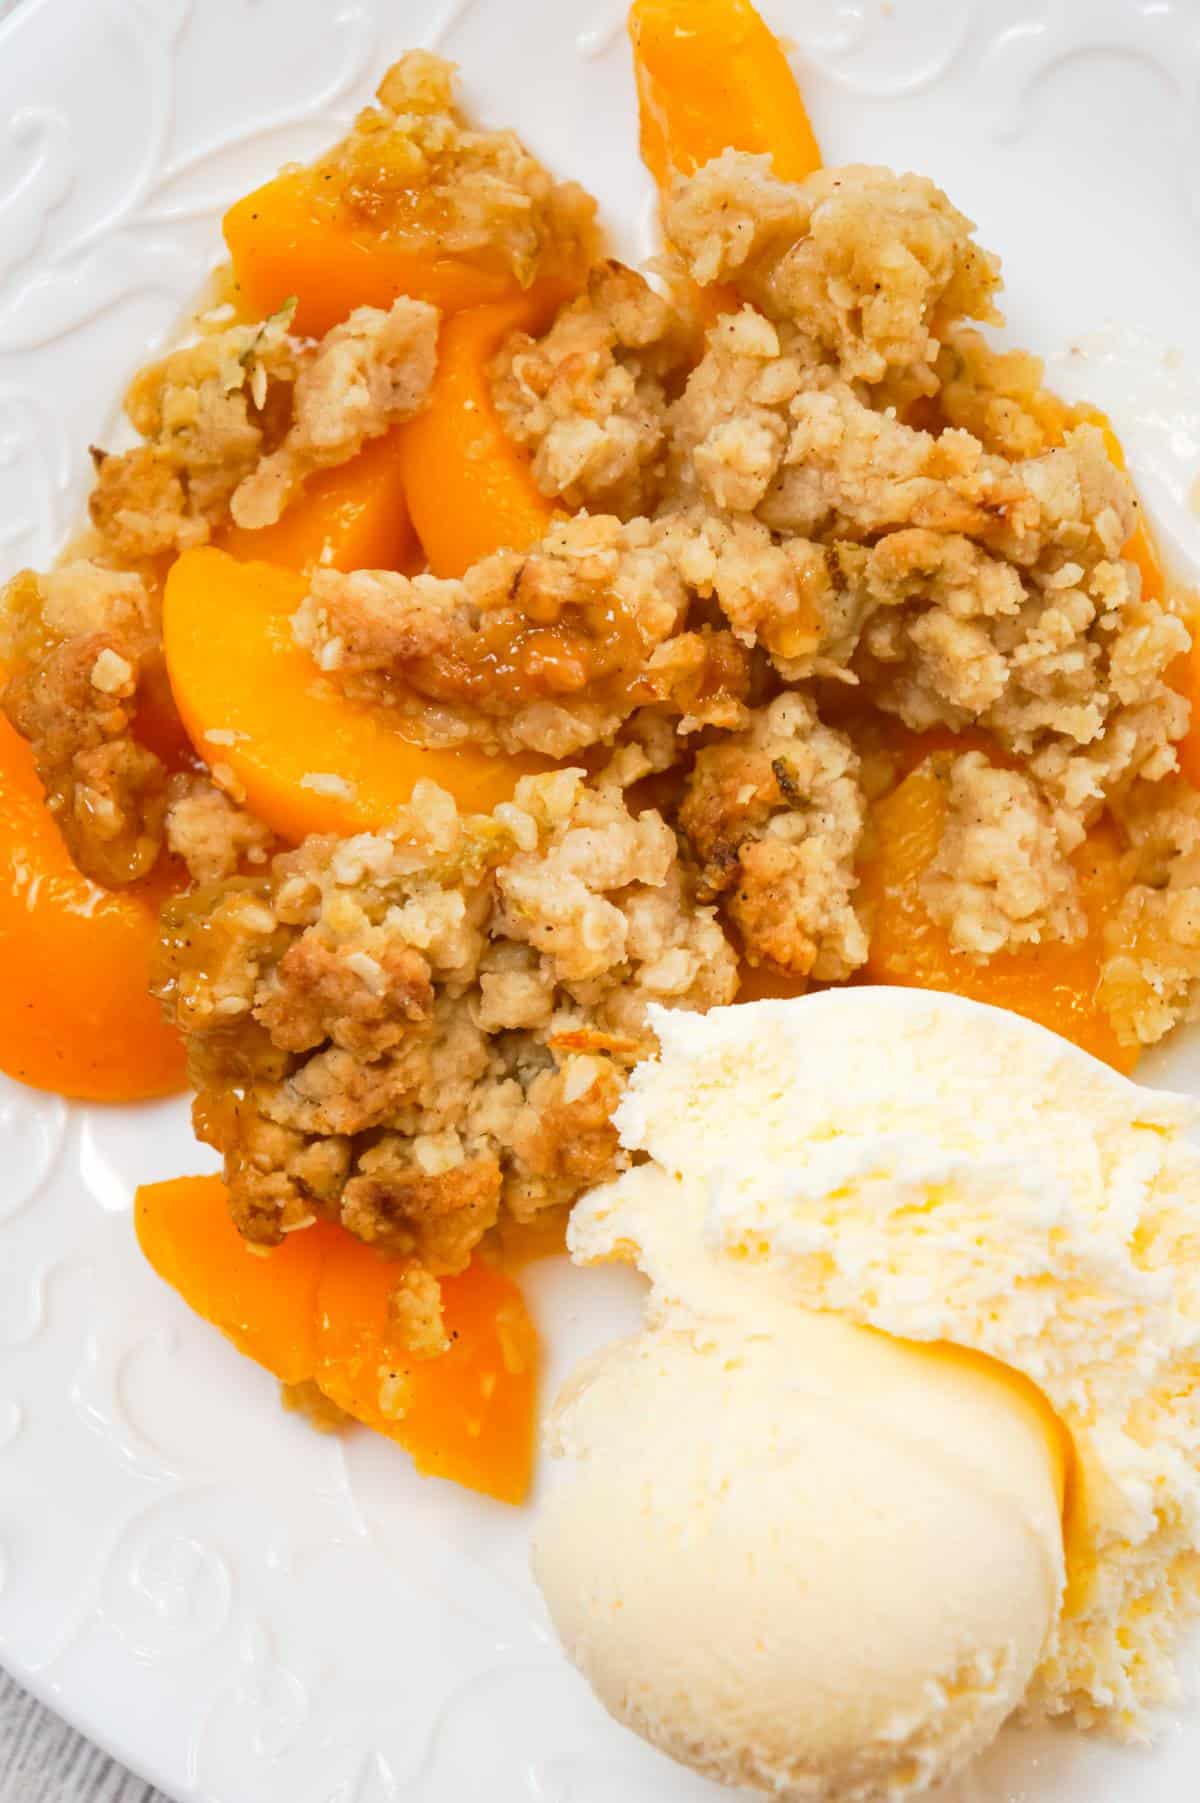 Peach Crumble is a delicious dessert recipe made with canned peaches and topped with a crunchy crumble topping with hints of cinnamon and citrus.